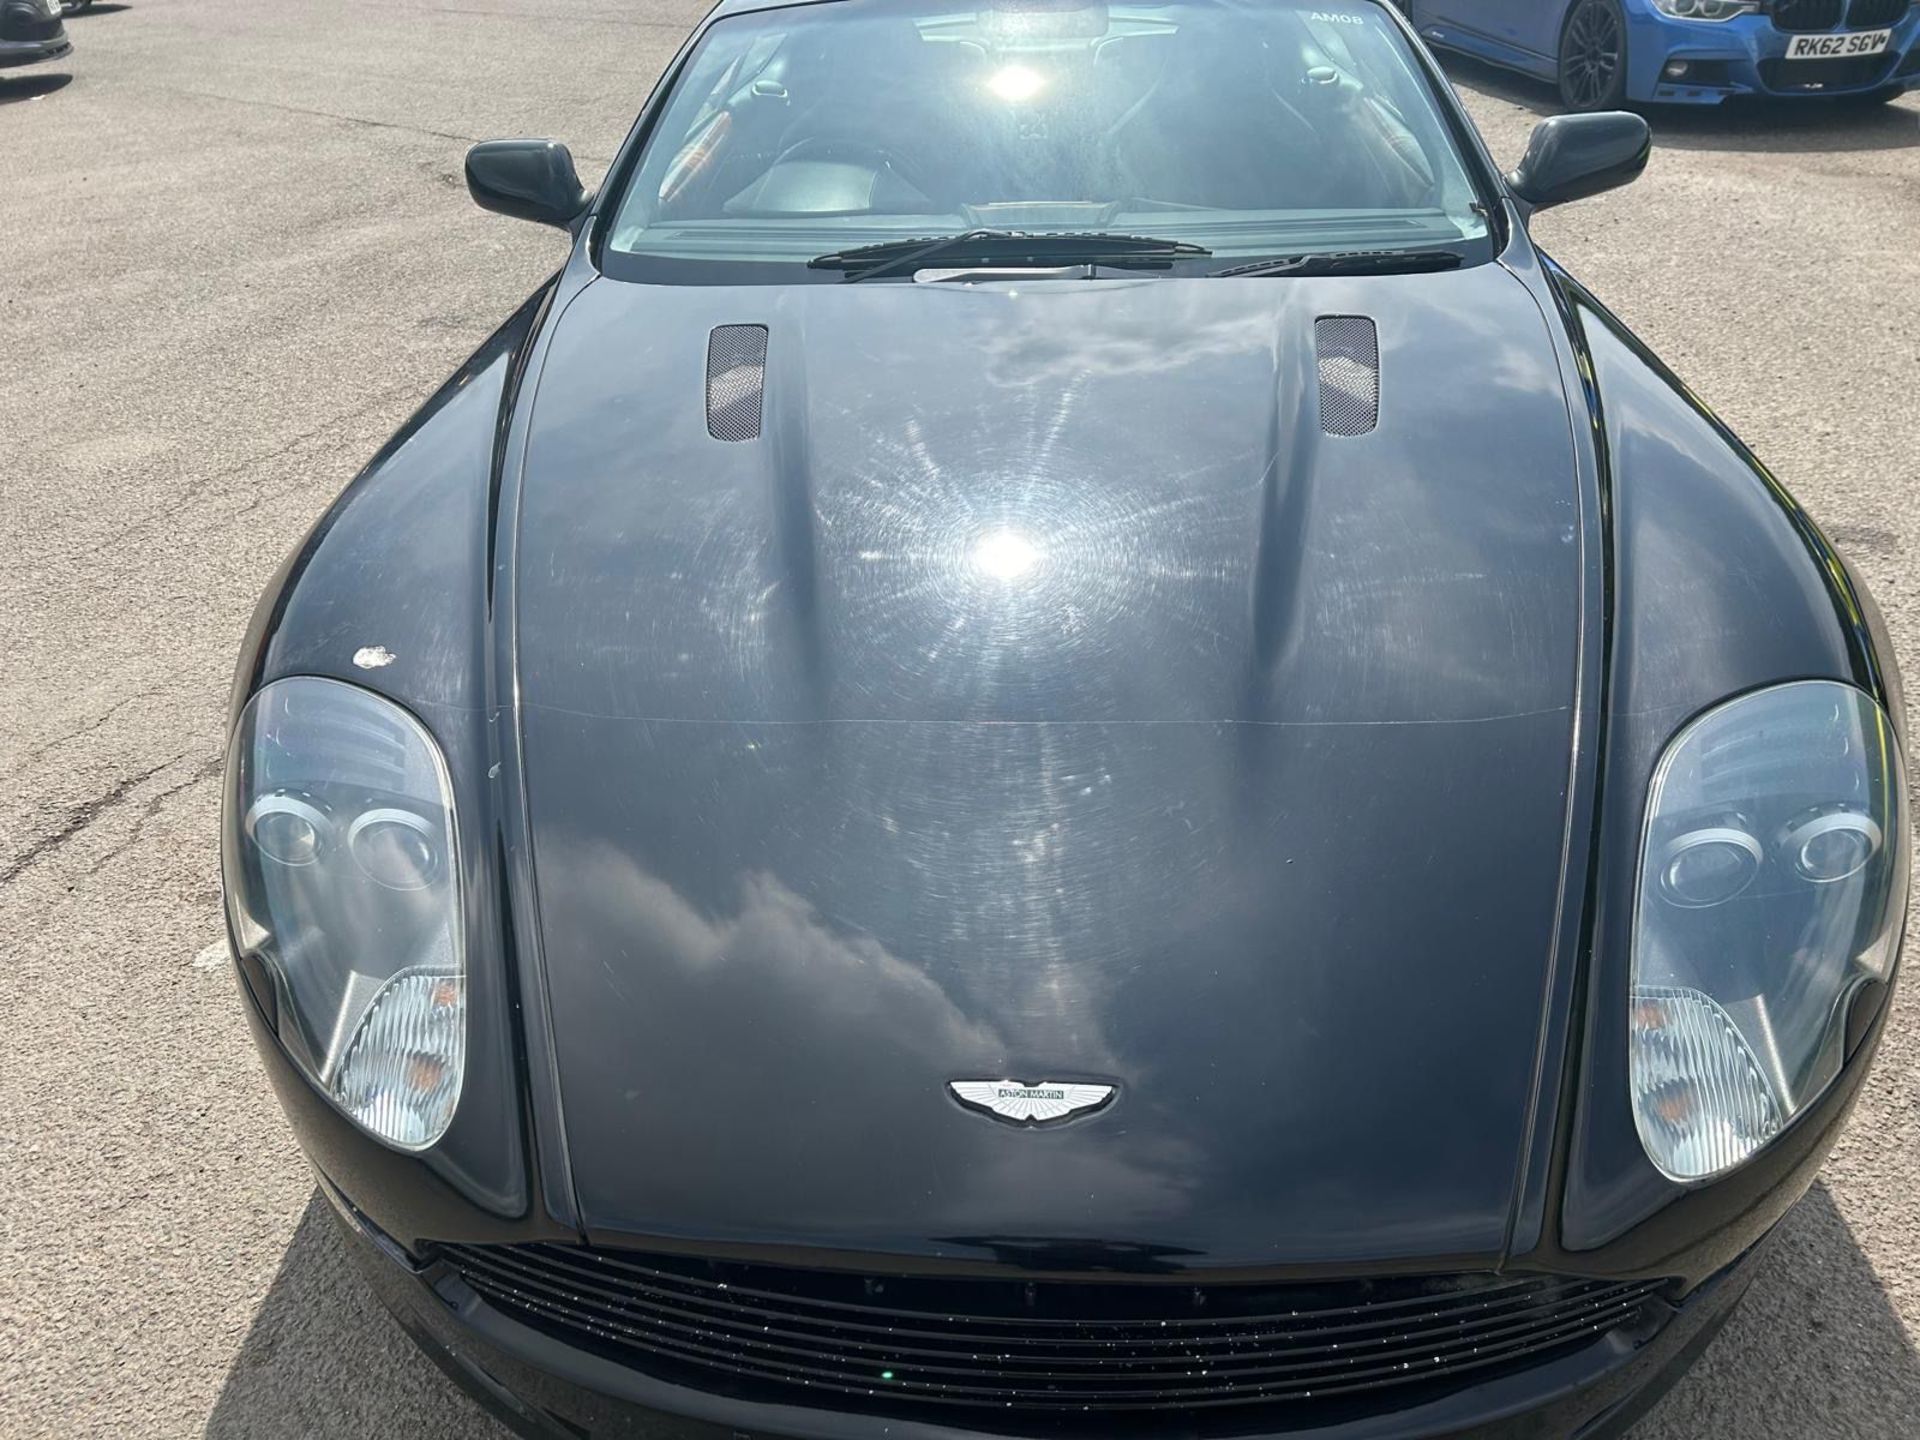 2005 Aston Martin DB9 V12 Tiptronic- No Reserve - Will have have 12 months MOT at point of sale - Image 2 of 7